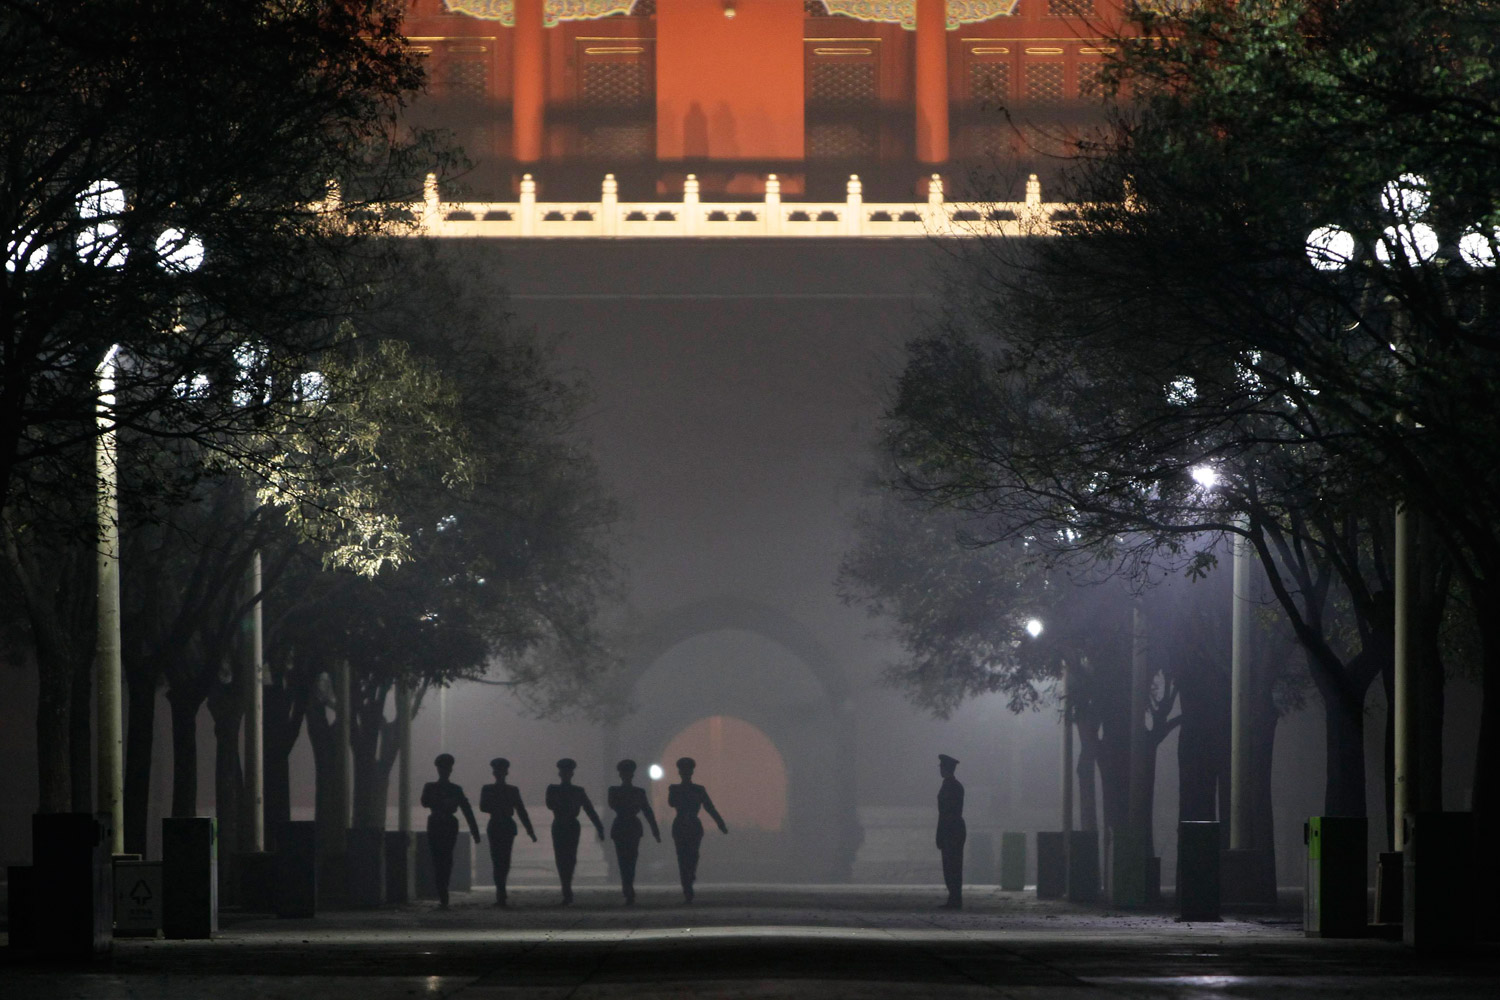 December 4, 2011. Paramilitary policemen practice drills inside the Forbidden City during a heavy haze and smog night in central Beijing, China.